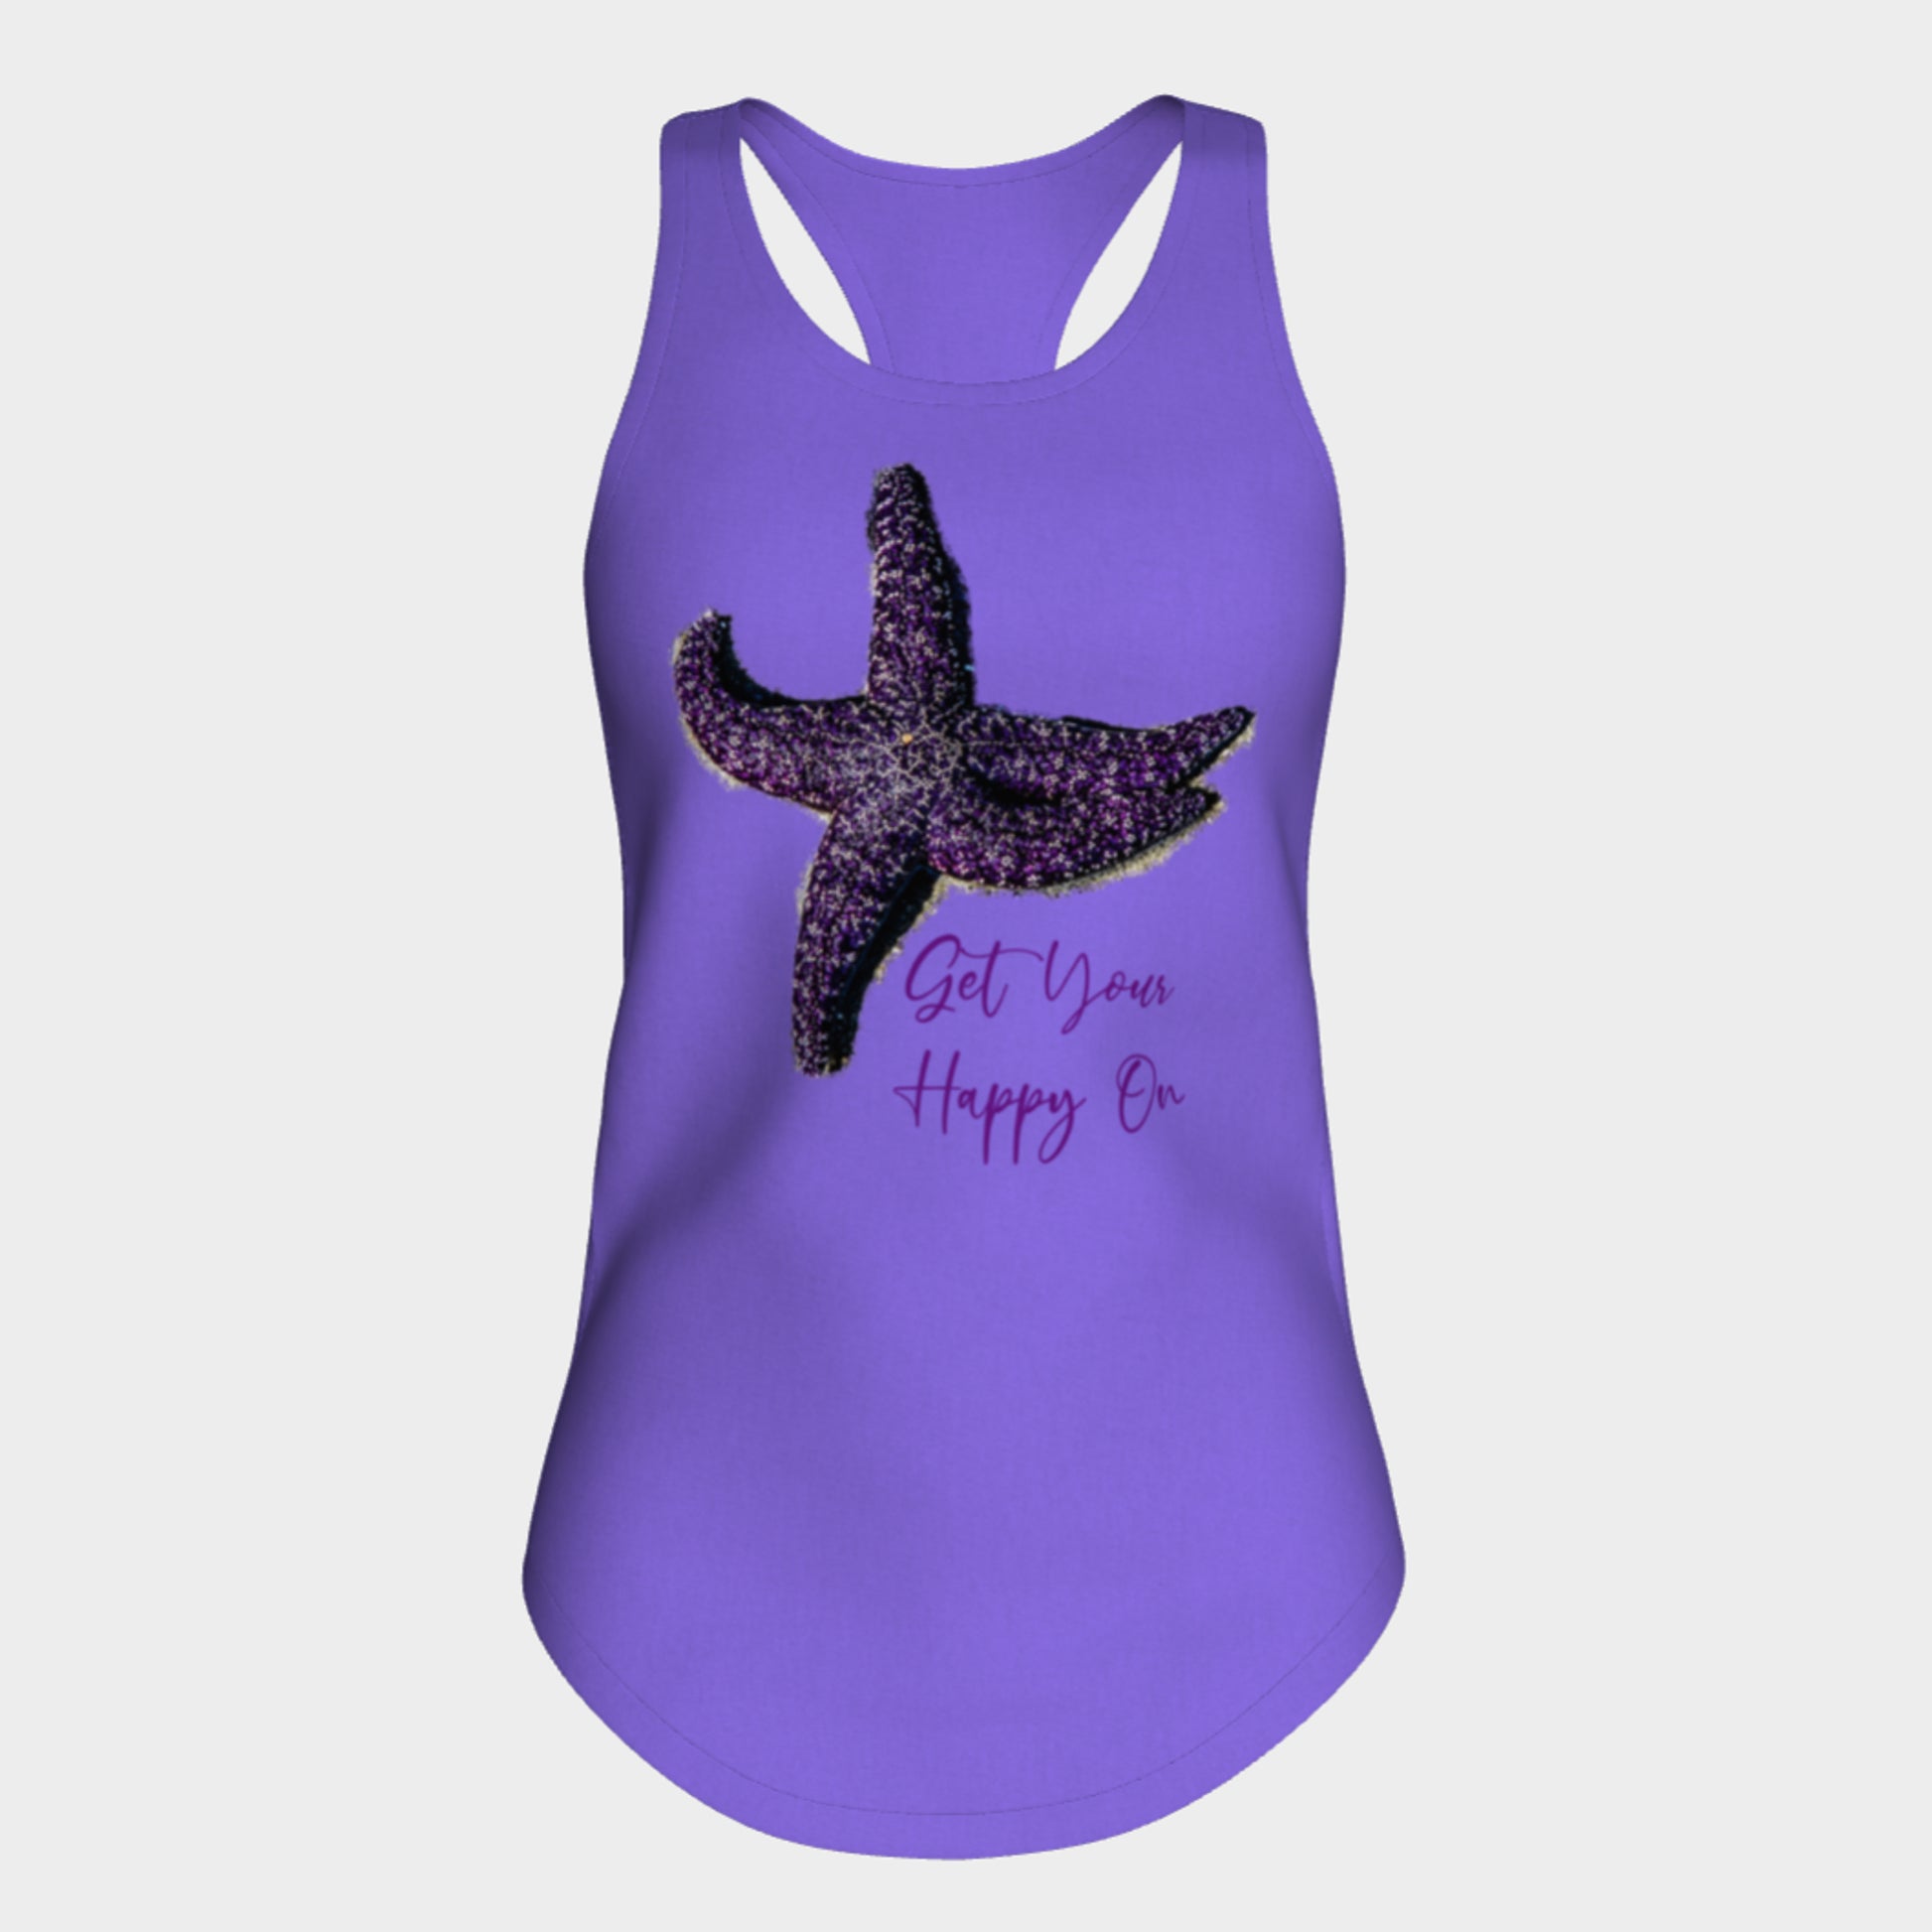 Get Your Happy Vancouver Island On Racerback Tank Top  Excellent choice for the summer or for working out.   Made from 60% spun cotton and 40% poly for a mix of comfort and performance, you get it all (including my photography and digital art) with this custom printed racerback tank top.